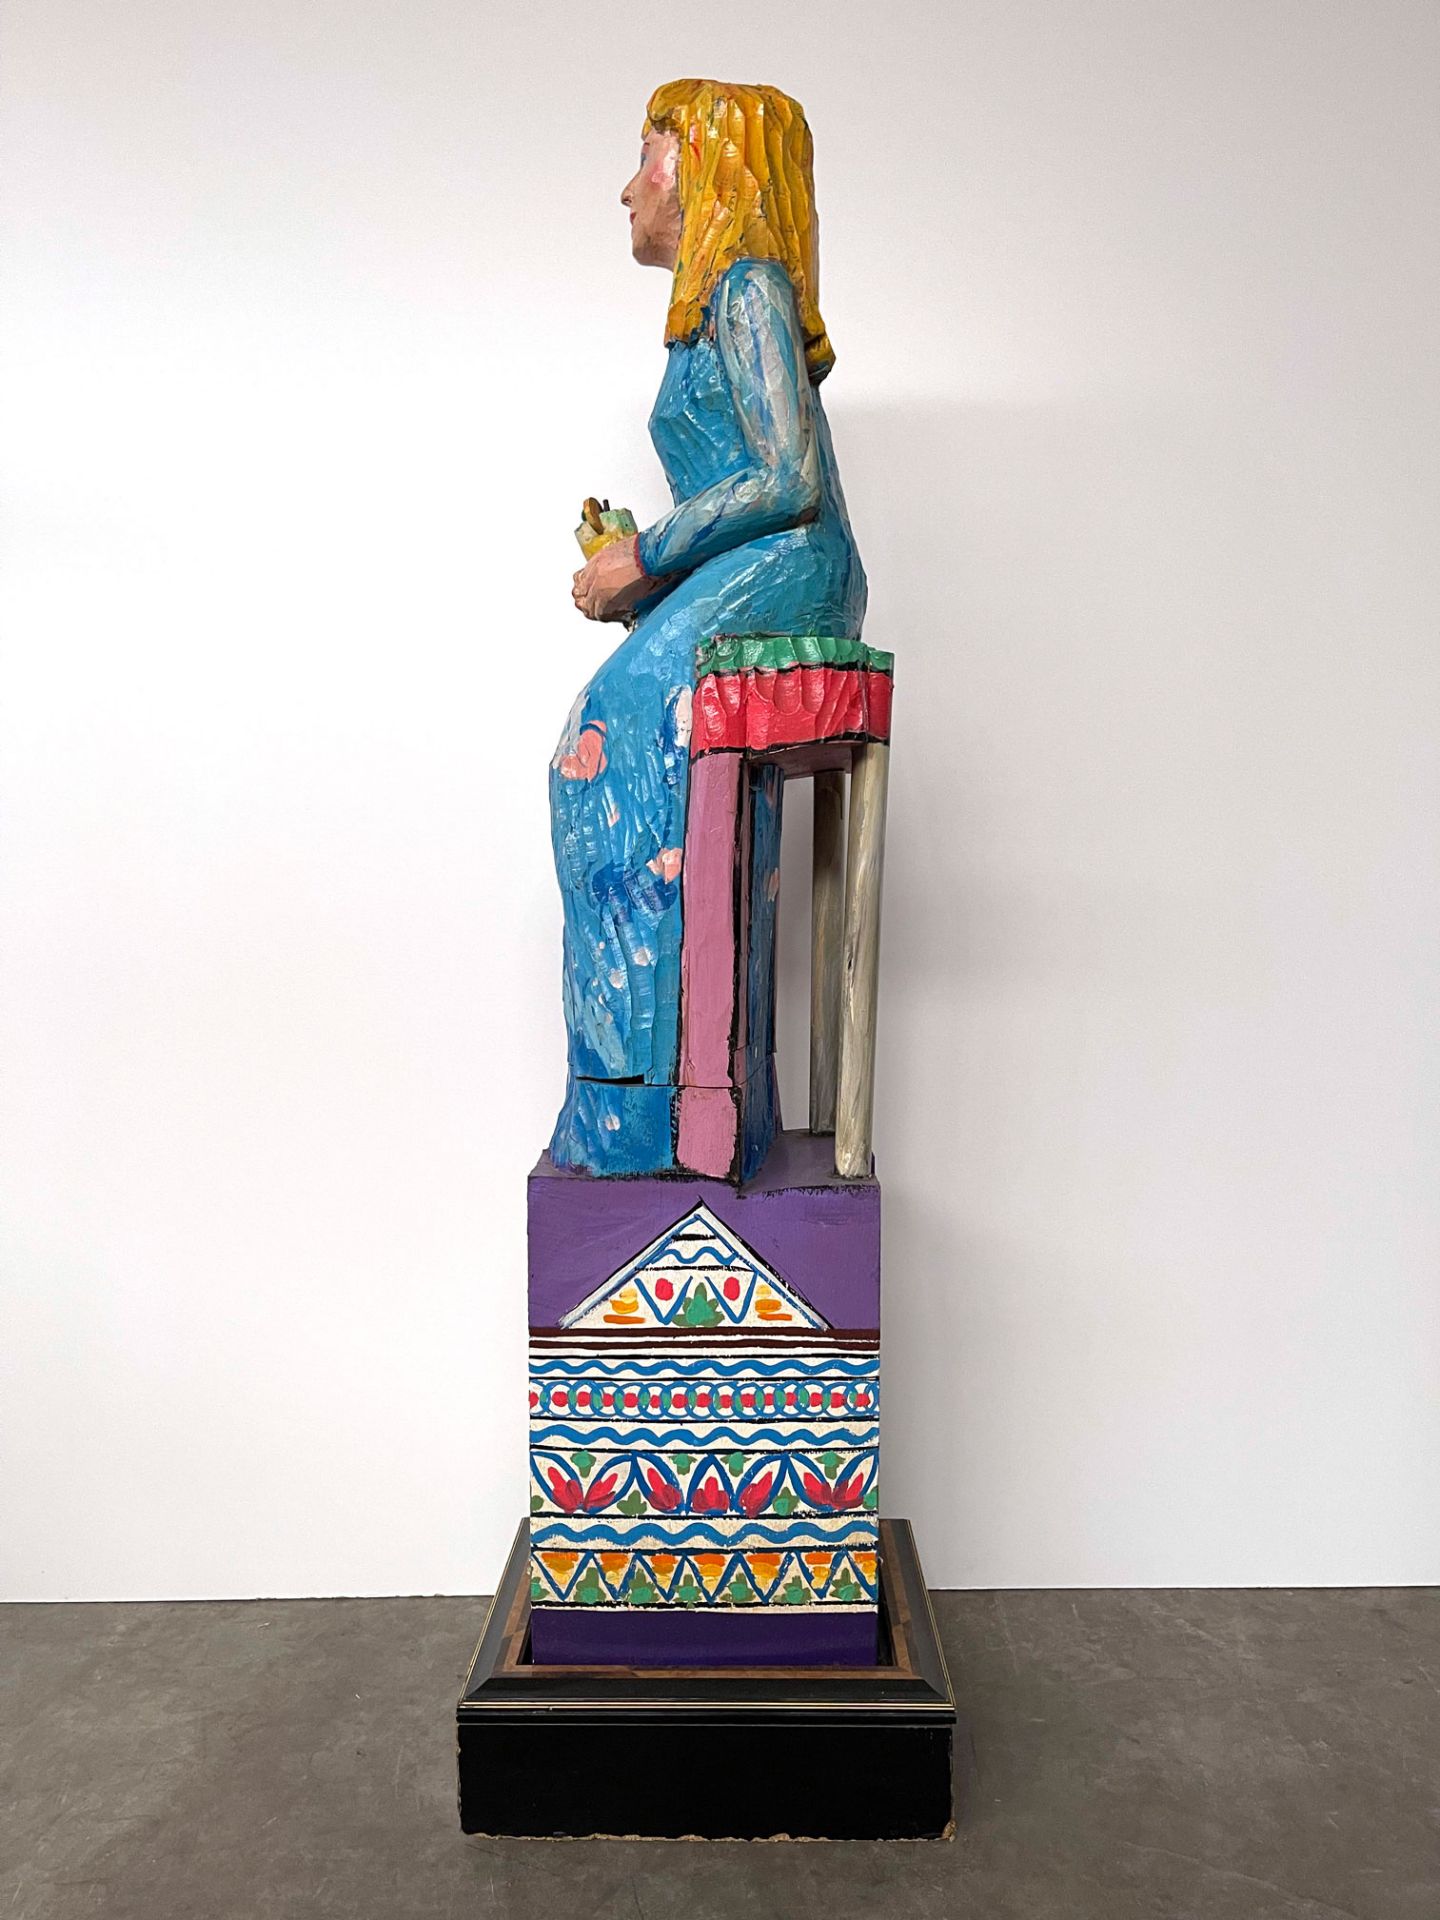 Wooden Statue Depicting a Woman on a Chair with Cocktail - Image 7 of 10